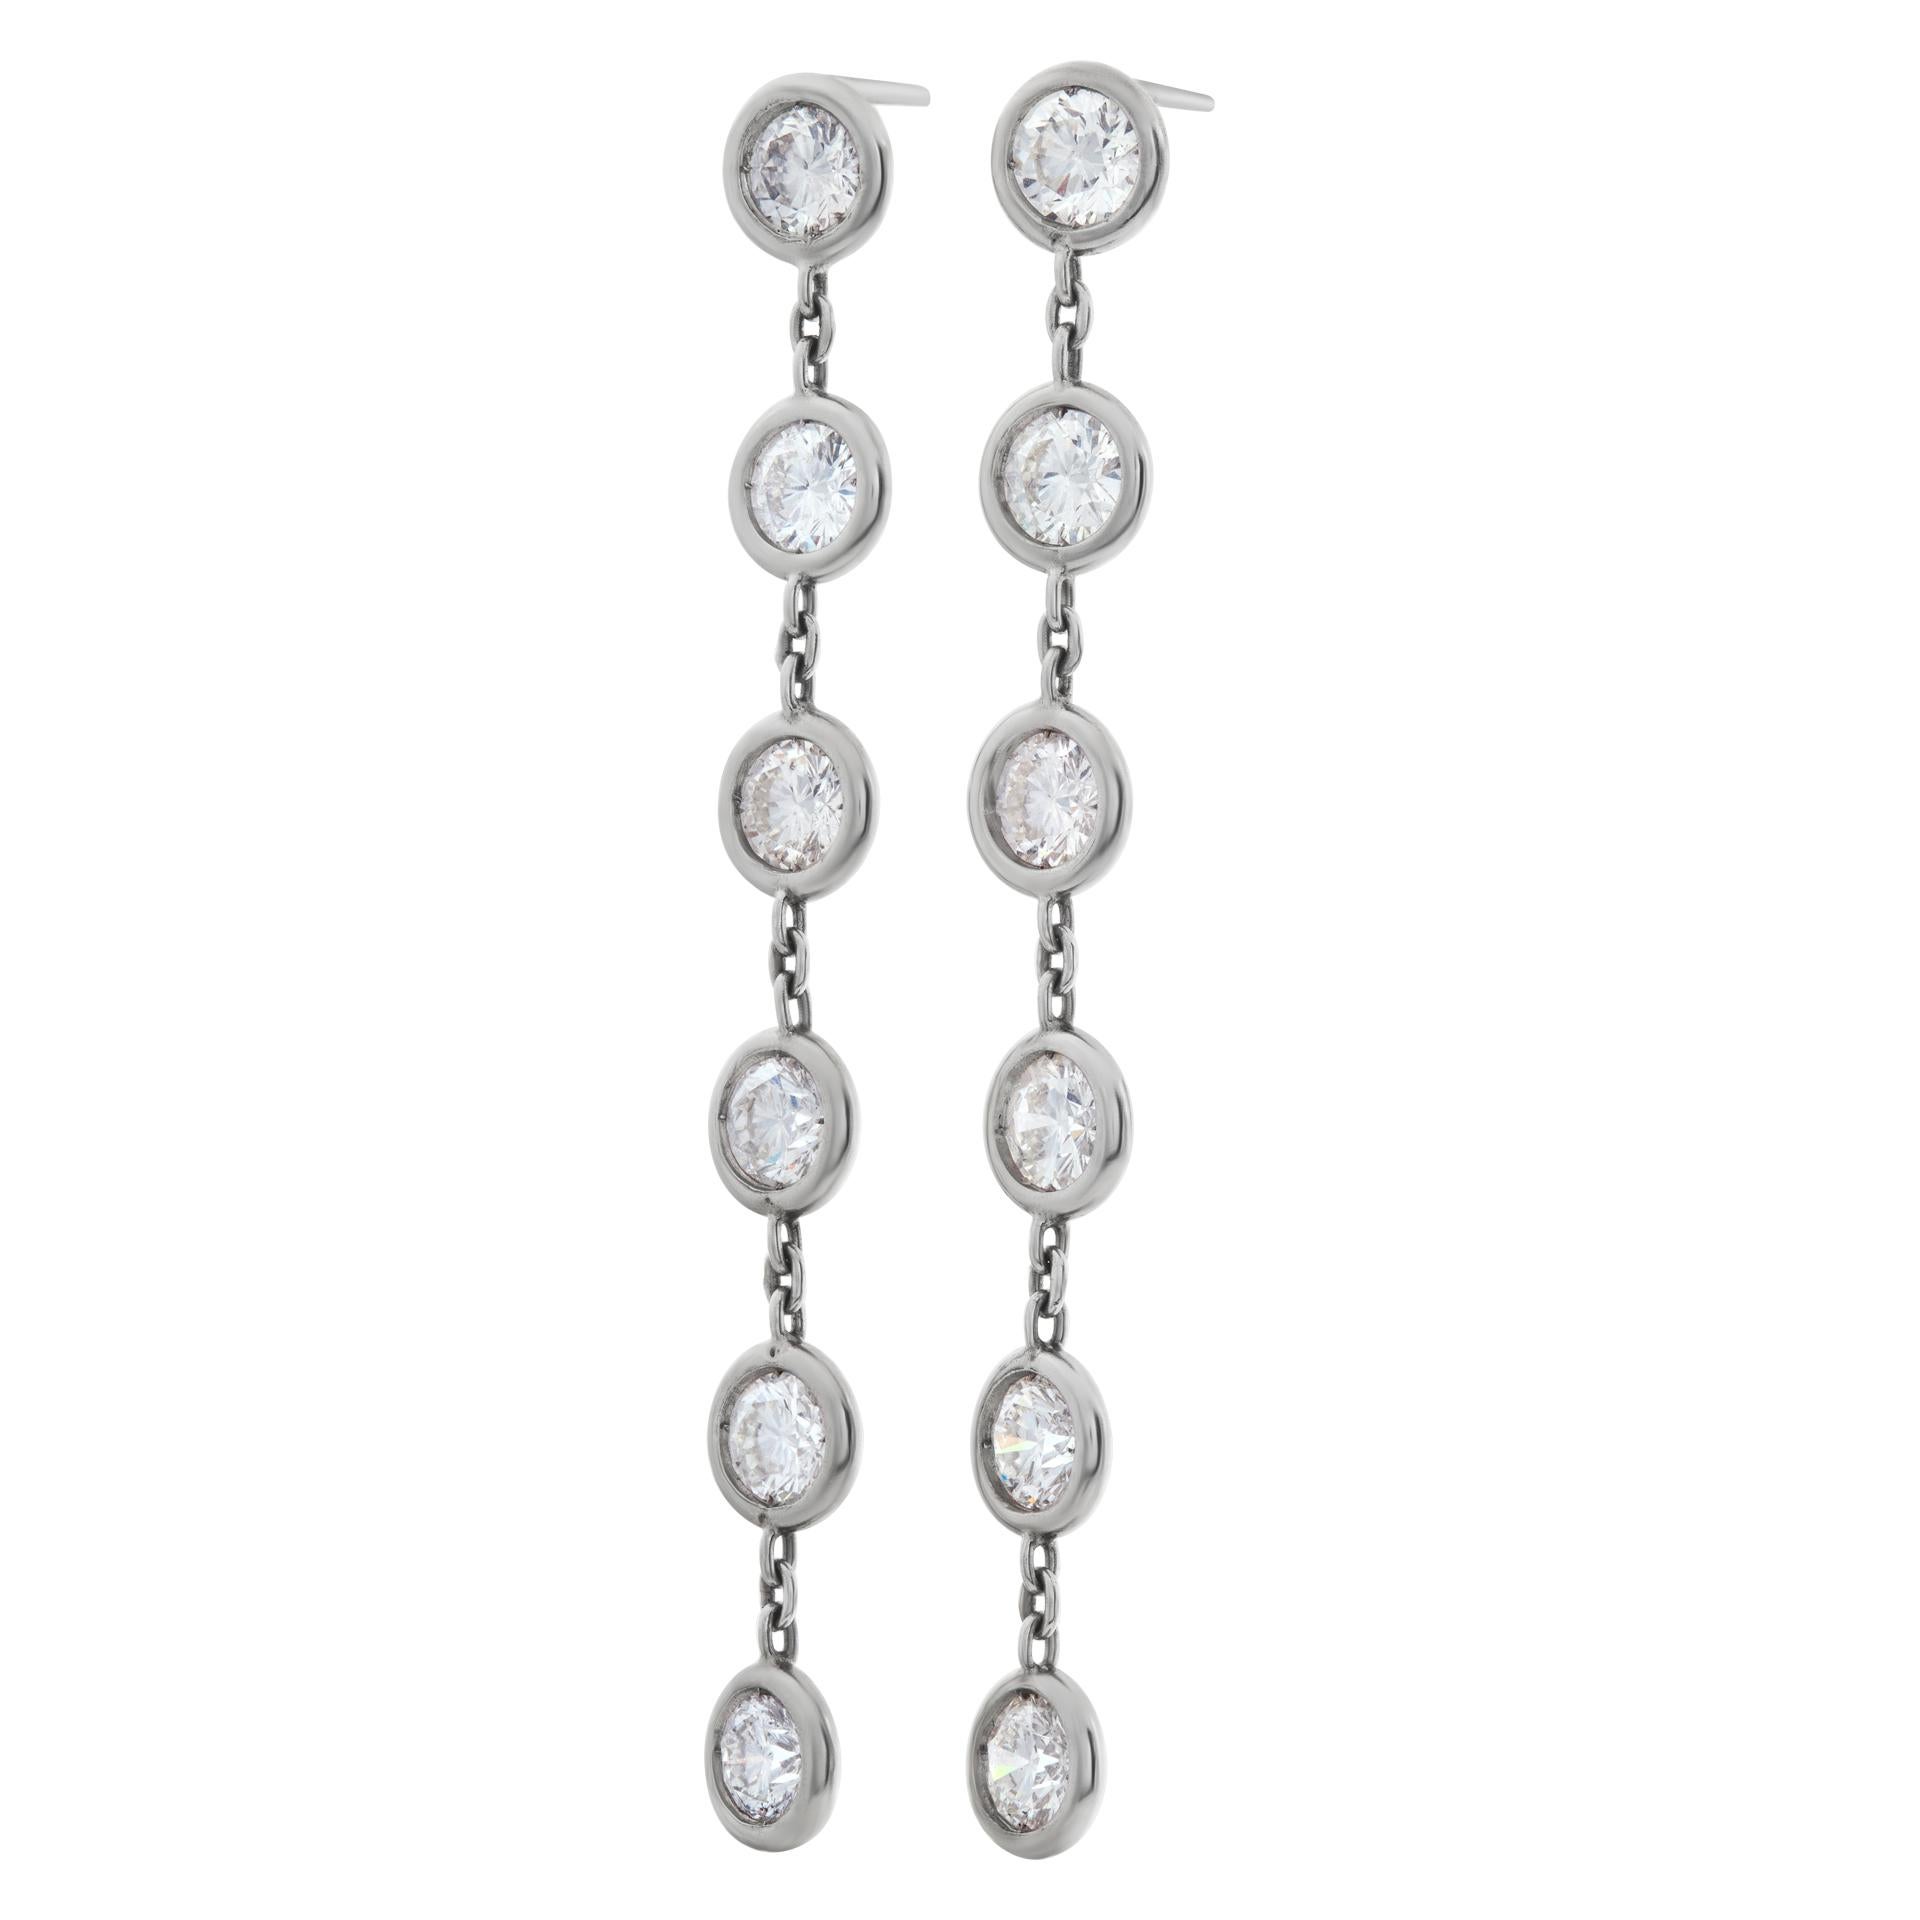 Bezel set diamond line drop earrings in platinum with approximately 5 carats total weight in round brilliant cut diamonds. Length 2.25 inches, width 6.5mm.